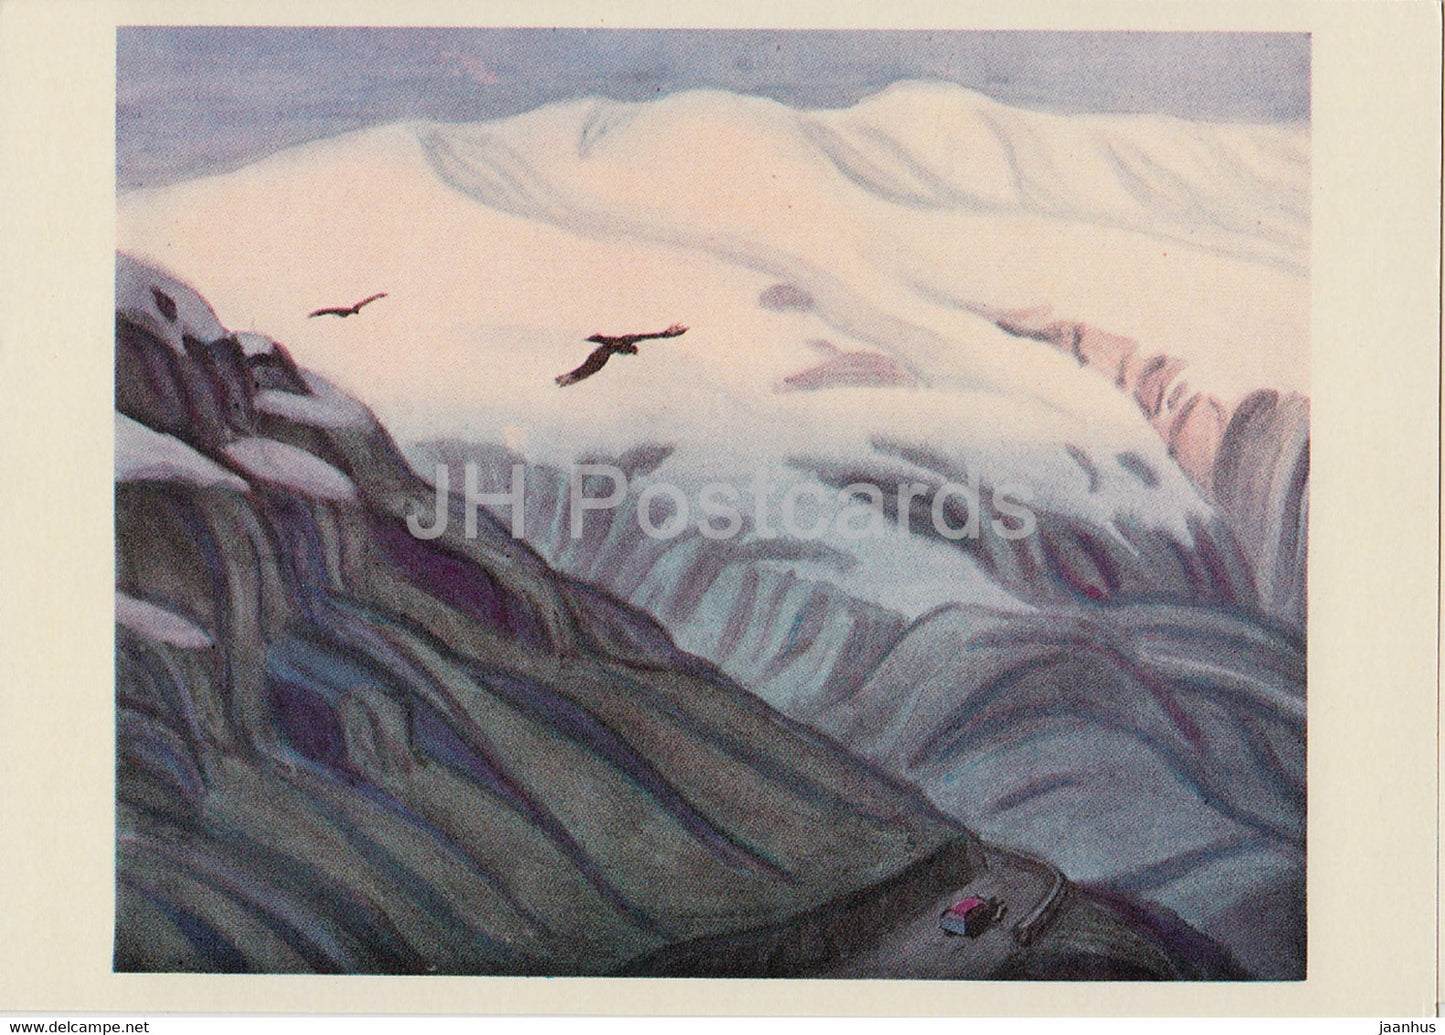 across Kyrgyzstan by V. Rogachev - Blue Mountains - illustration - 1979 - Russia USSR - unused - JH Postcards